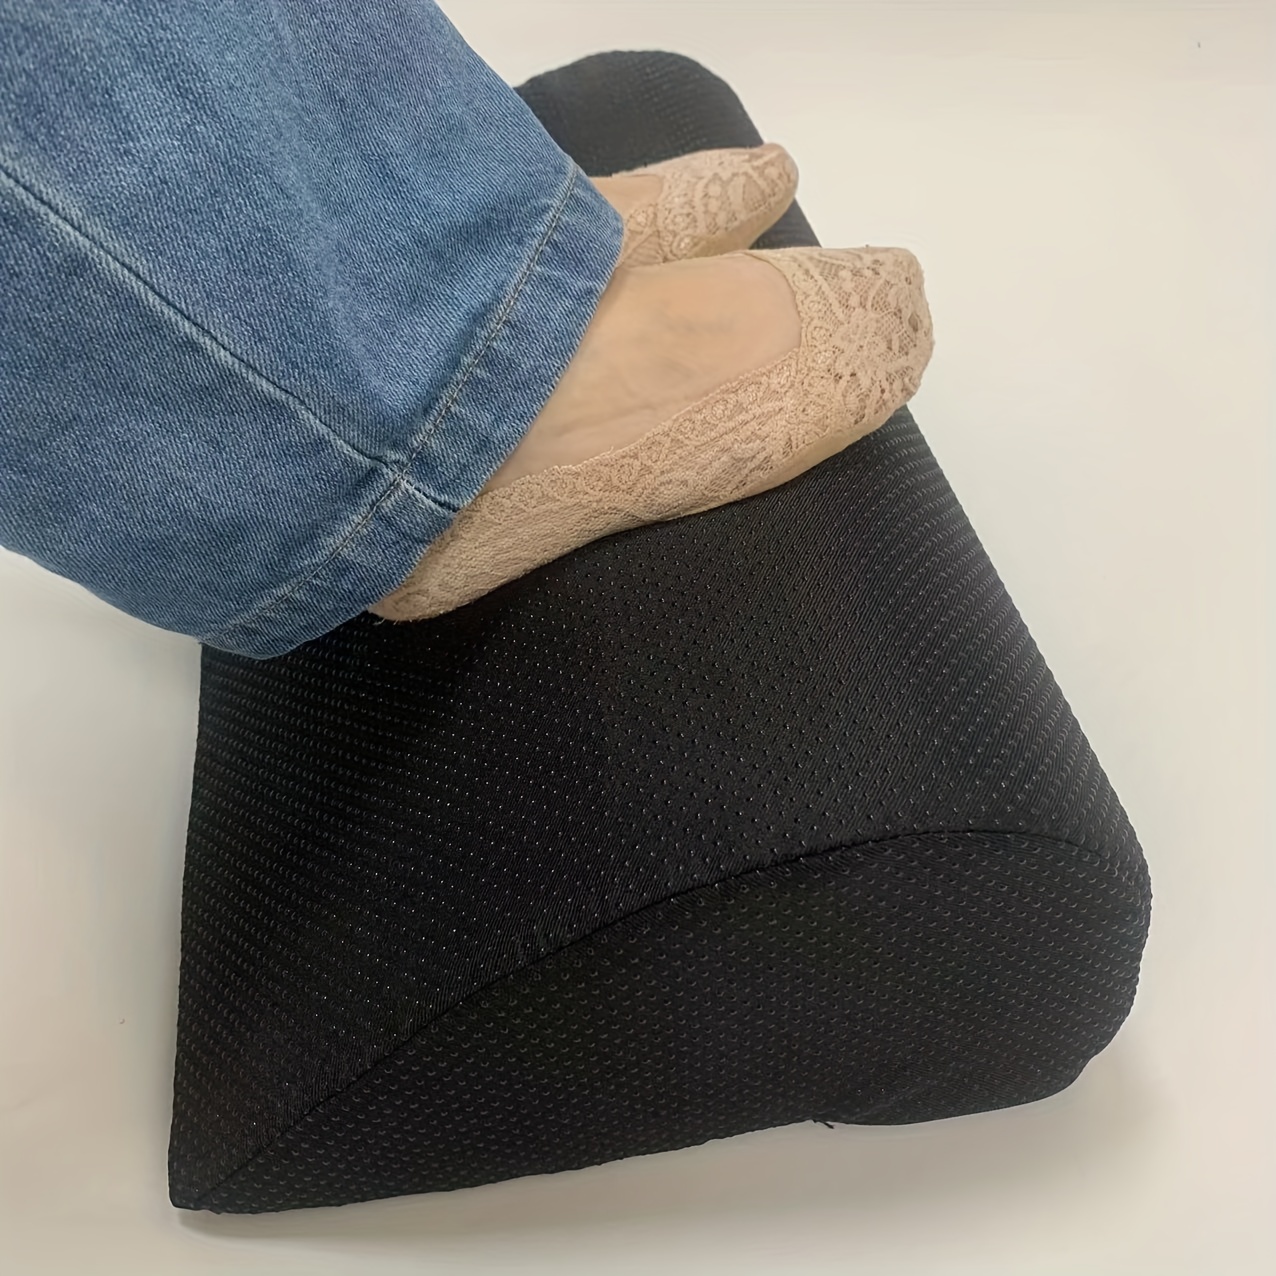 2 Adjustable Heights Foot Rest for Under Desk, Soft Memory Foam Foot  Cushion Ergonomic for Office, Work, Car, Gaming, Computer - AliExpress